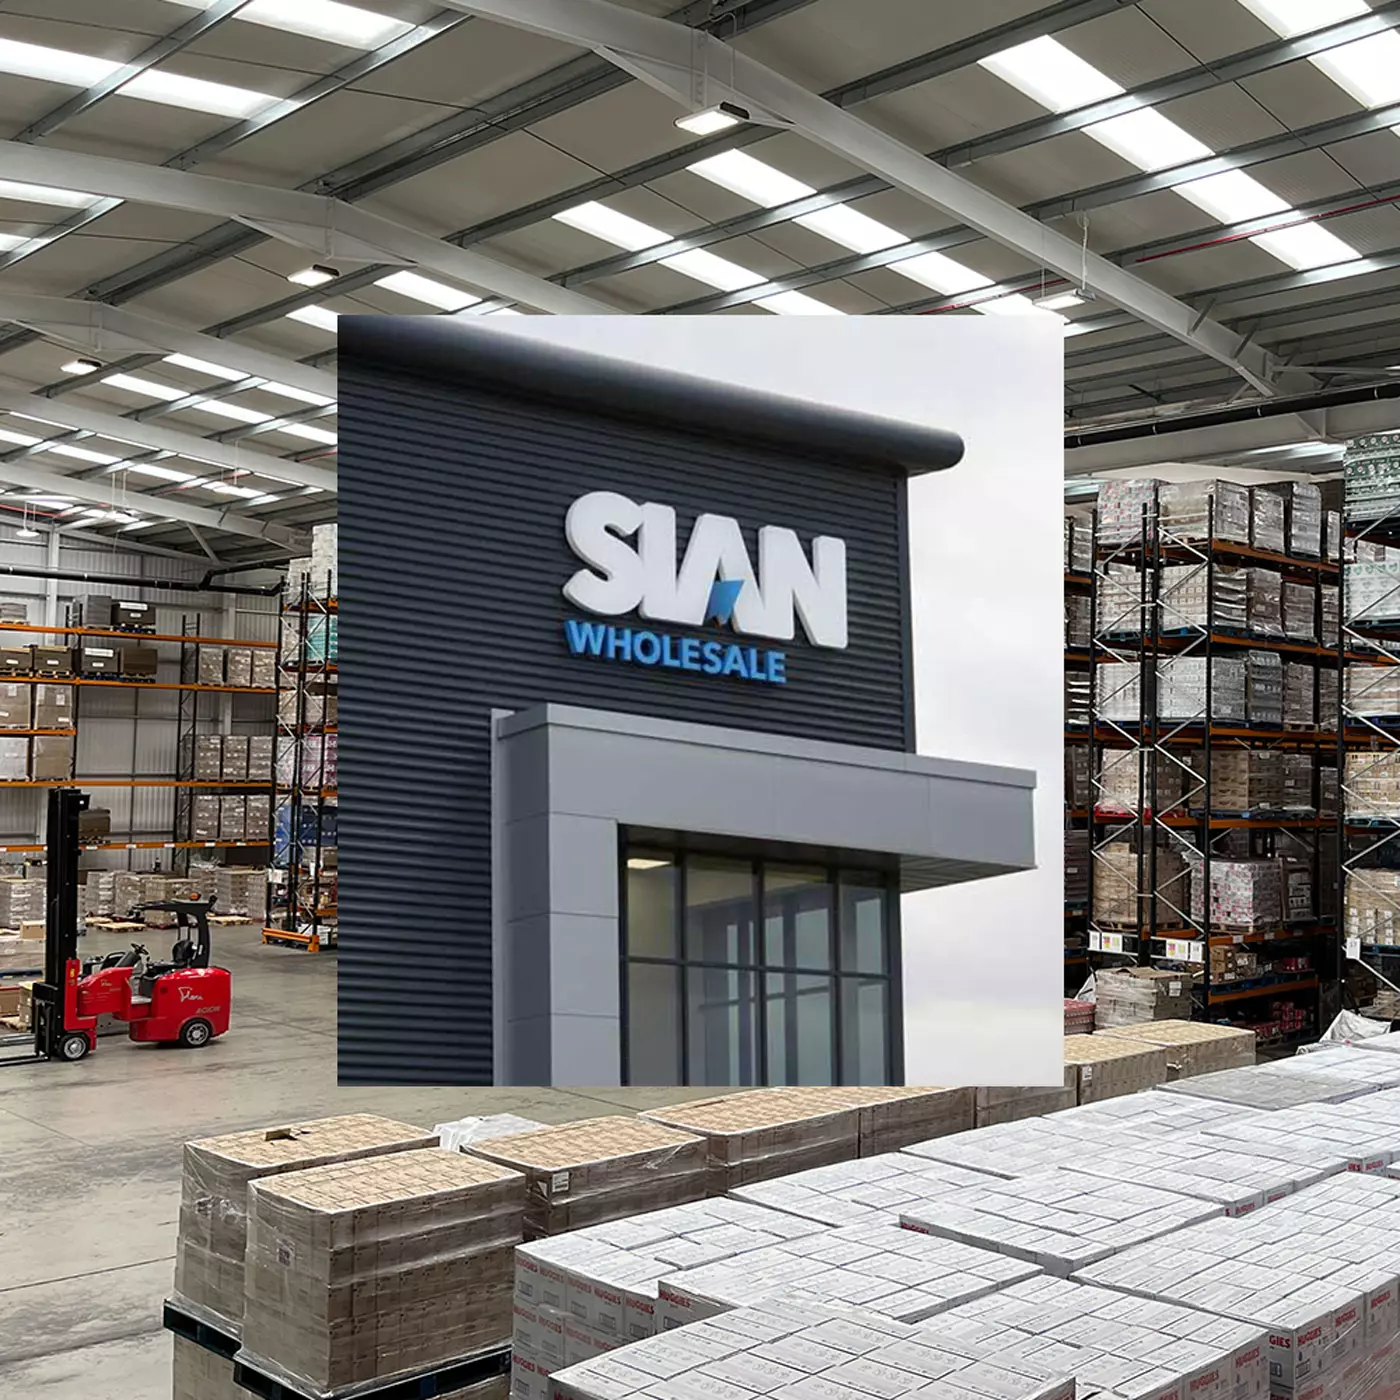 SIAN-Inside-and-Out-of-Warehouse-.jpg